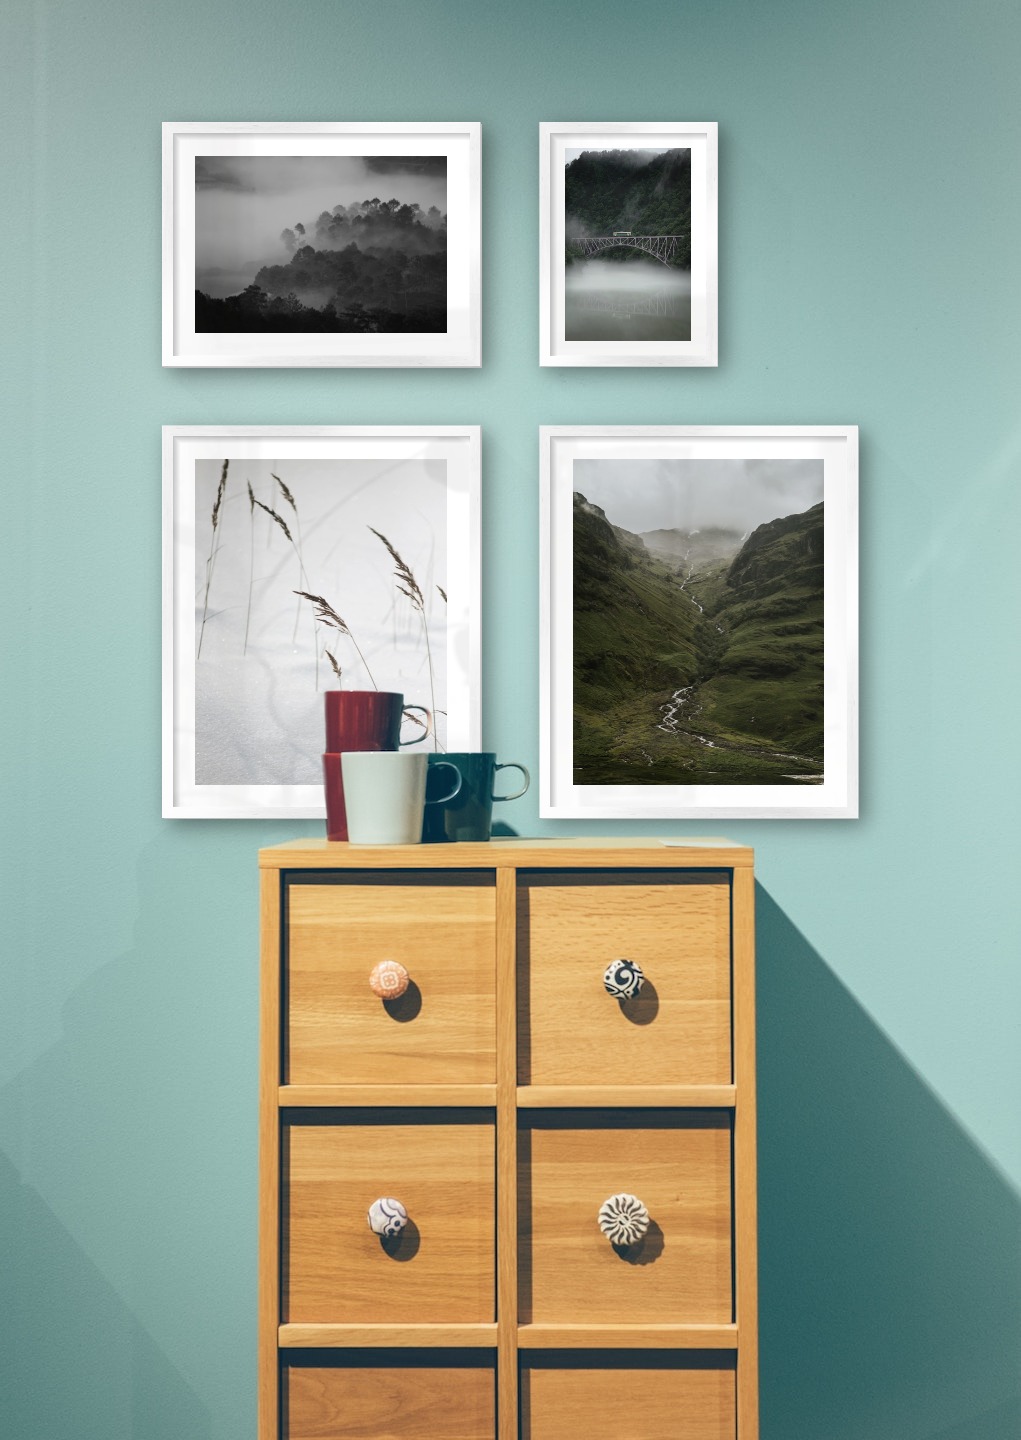 Gallery wall with picture frames in silver in sizes 40x50, 30x40 and 21x30 with prints "Sharp in the snow", "Stream in valley", "Foggy wooden tops" and "Train over bridge"